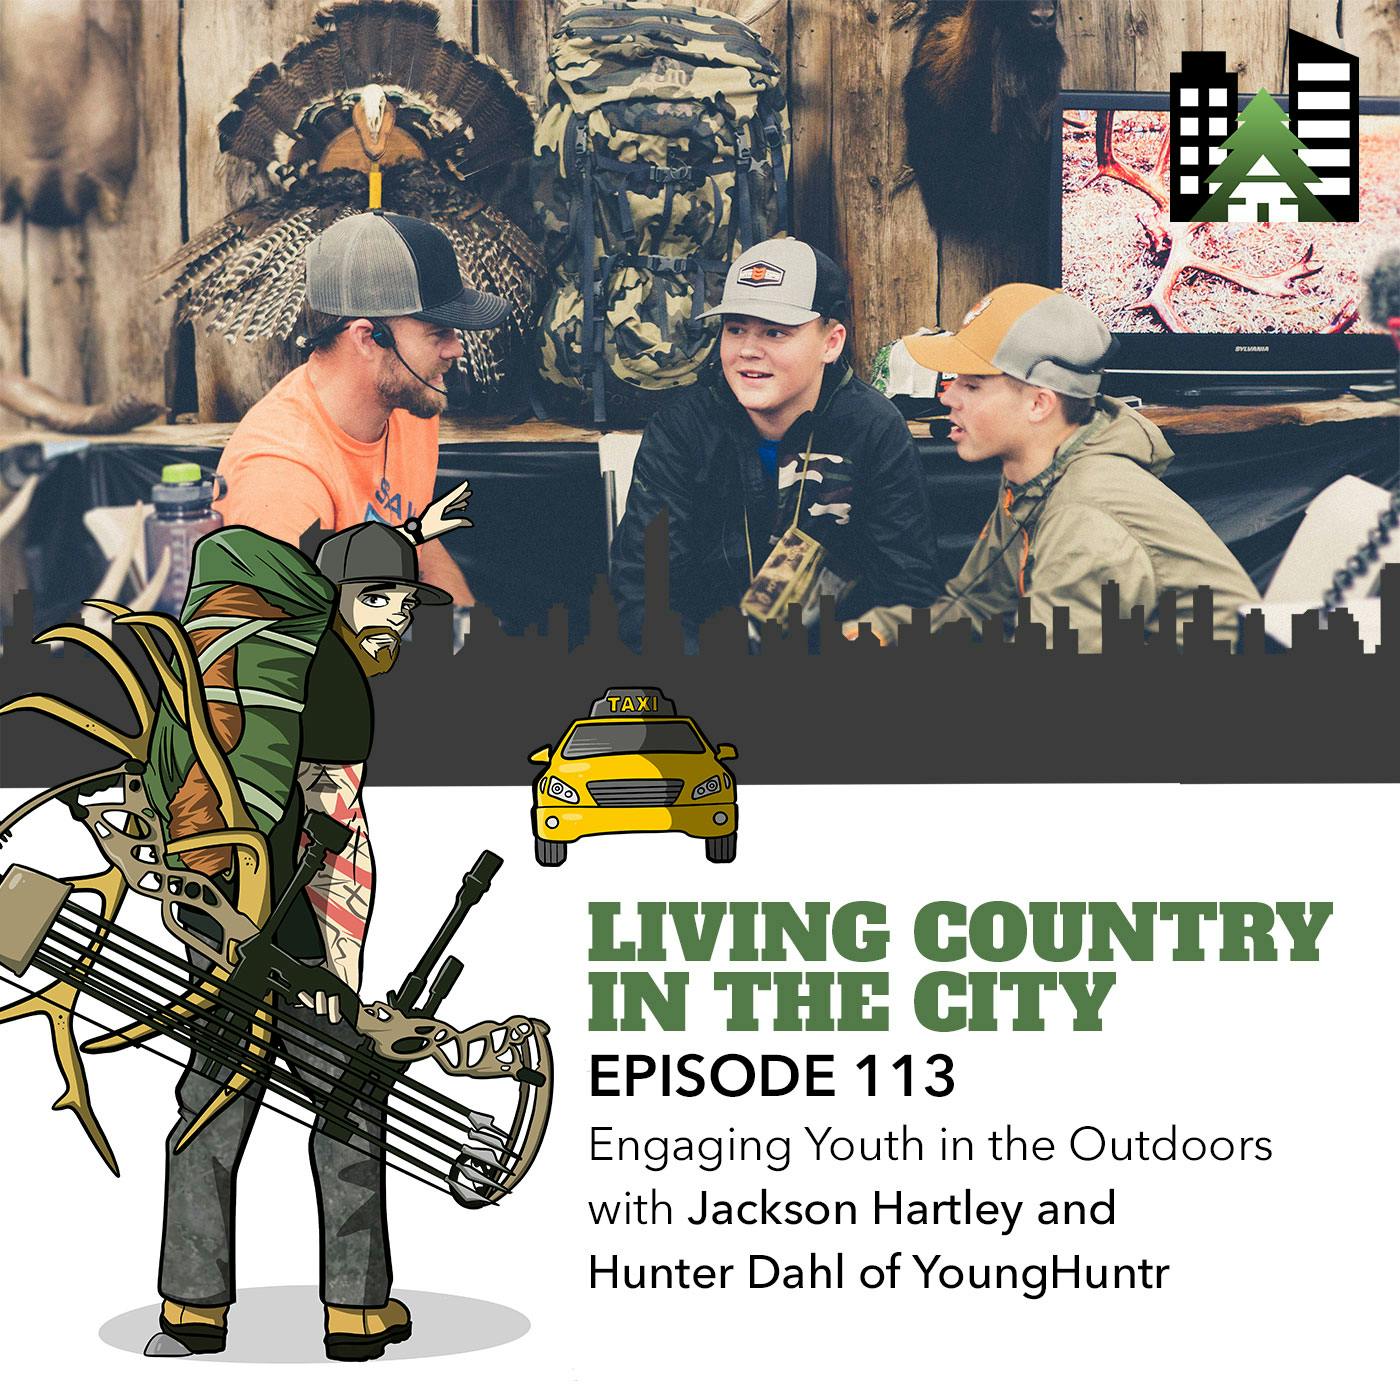 Ep 113 - Engaging Youth in the Outdoors with Jackson Hartley and Hunter Dahl of YoungHuntr